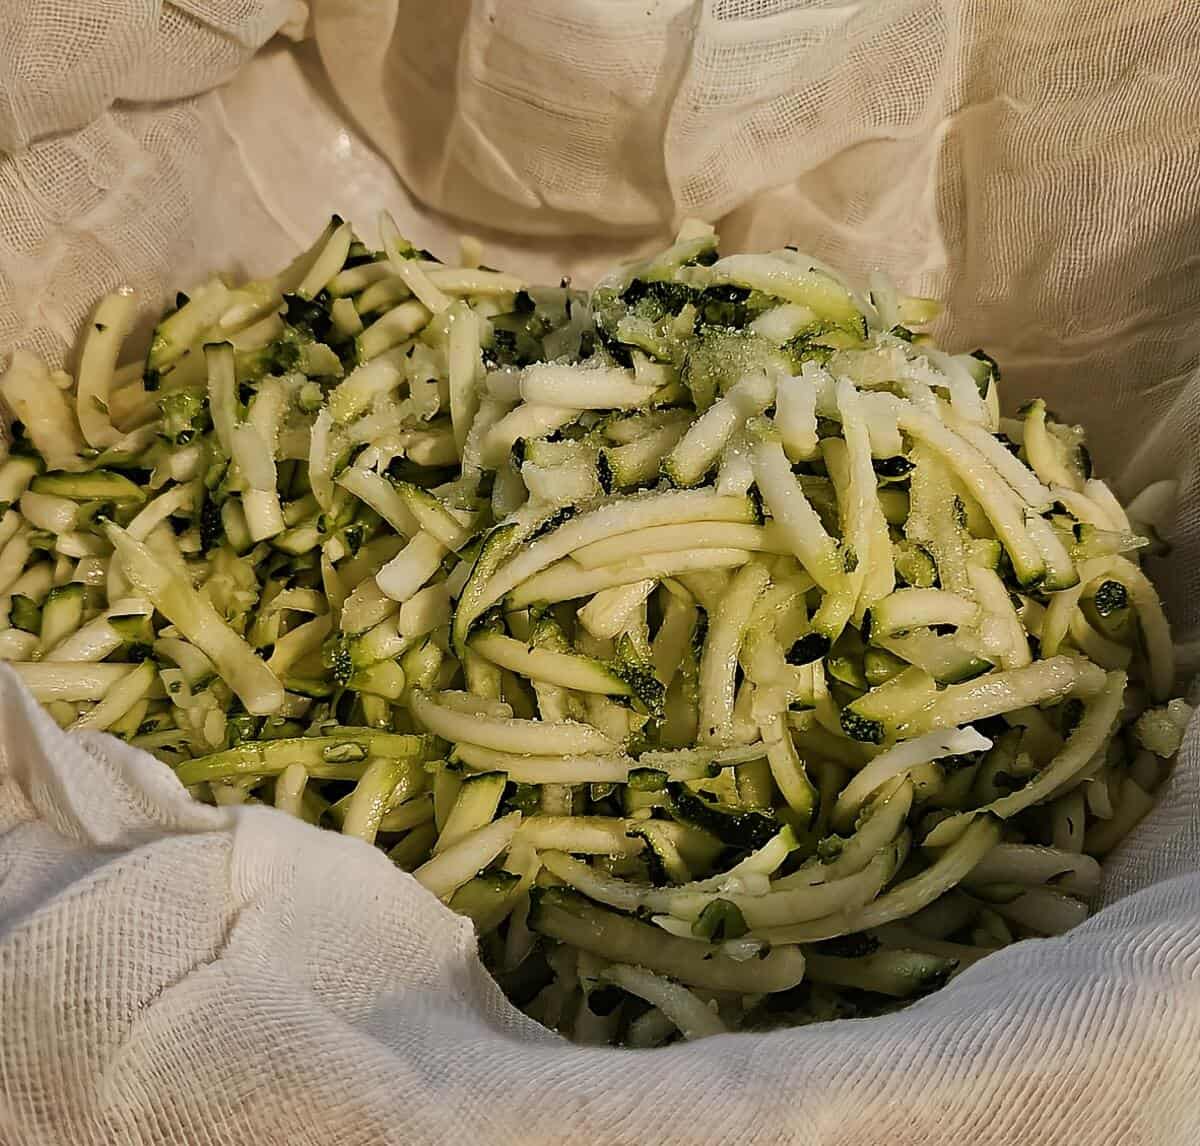 shredded and salted zucchini in cheesecloth, ready to be closed up